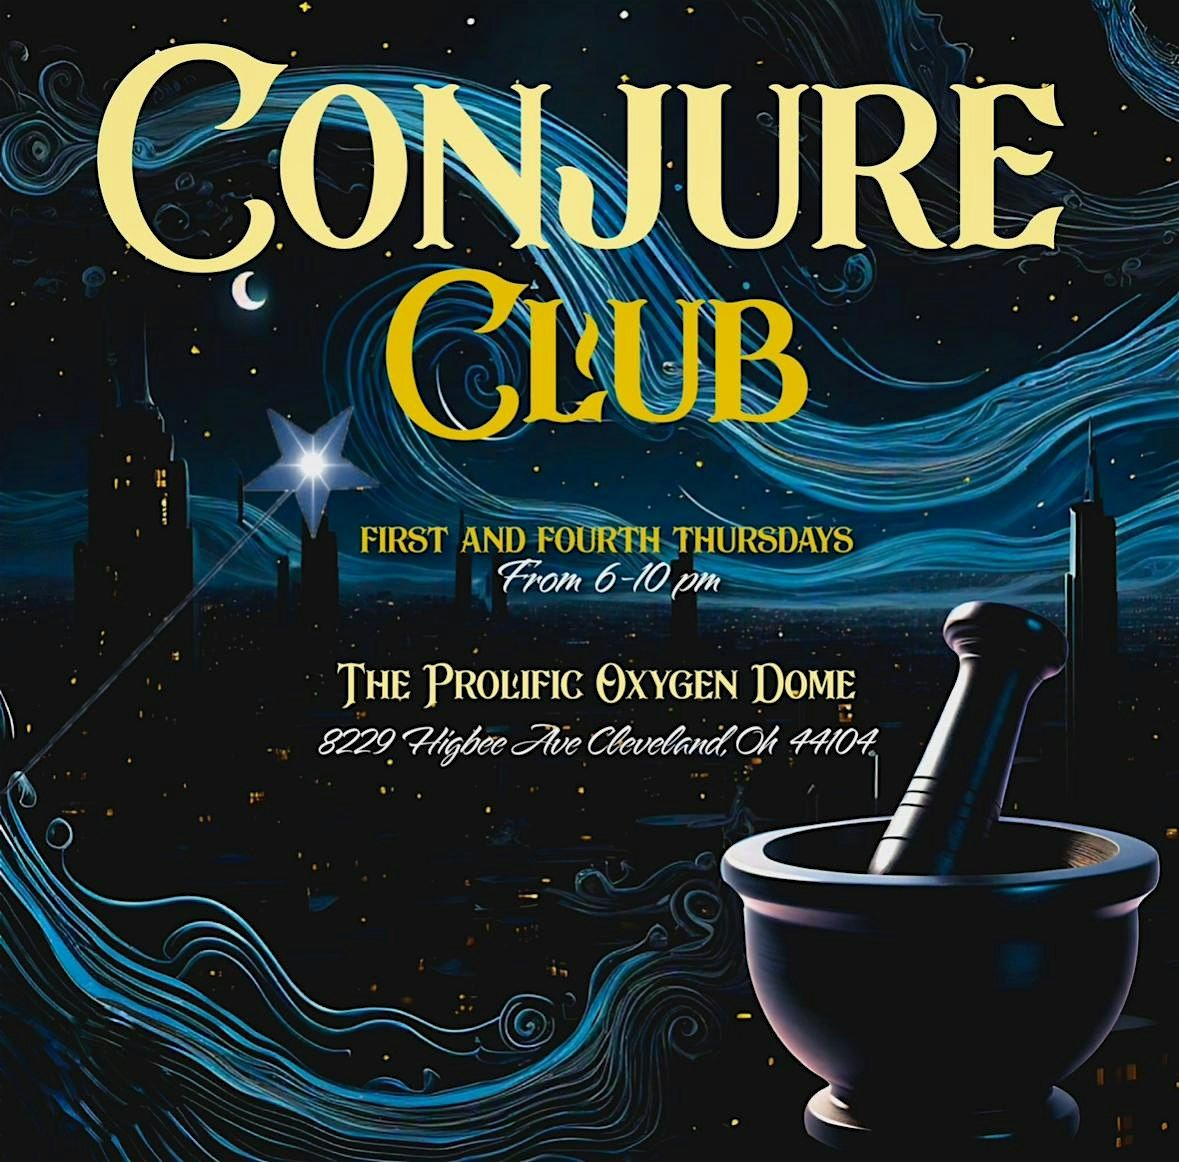 The Conjure Club